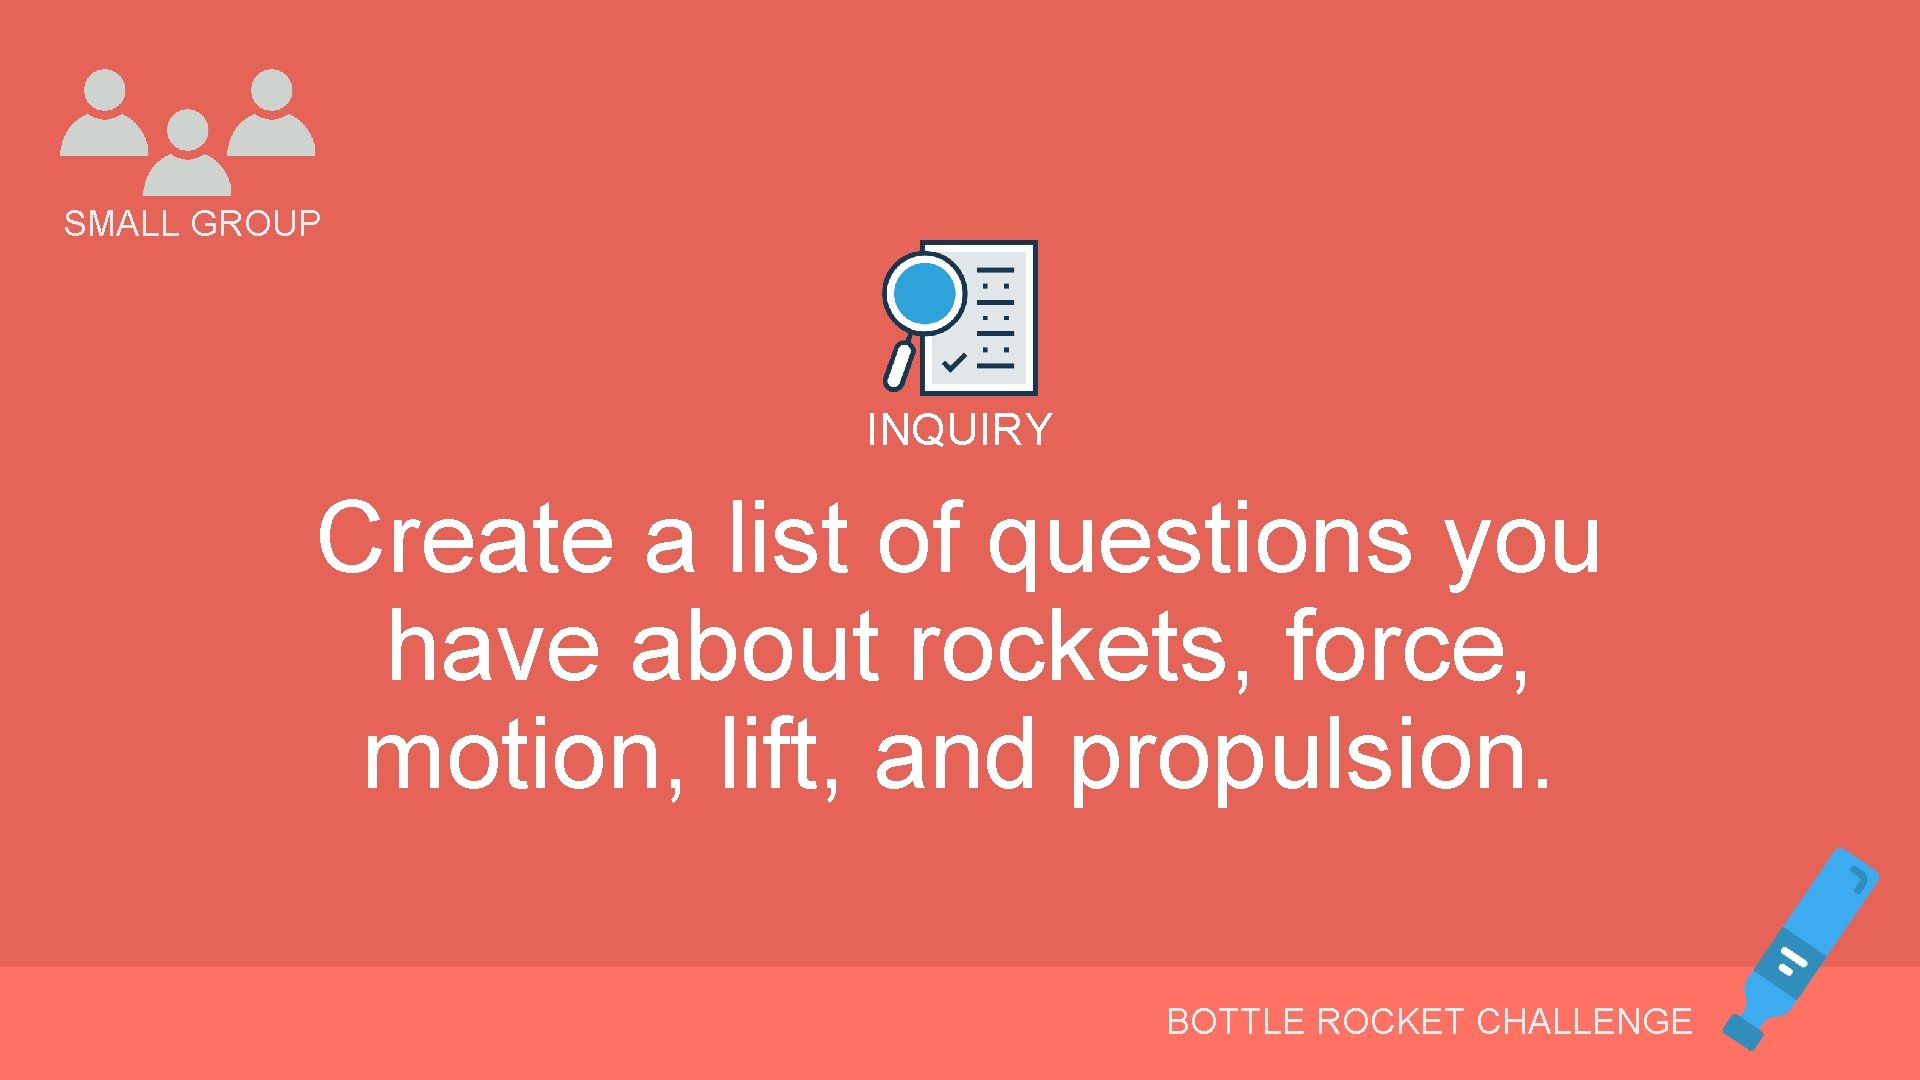 SMALL GROUP INQUIRY Create a list of questions you have about rockets, force, motion,